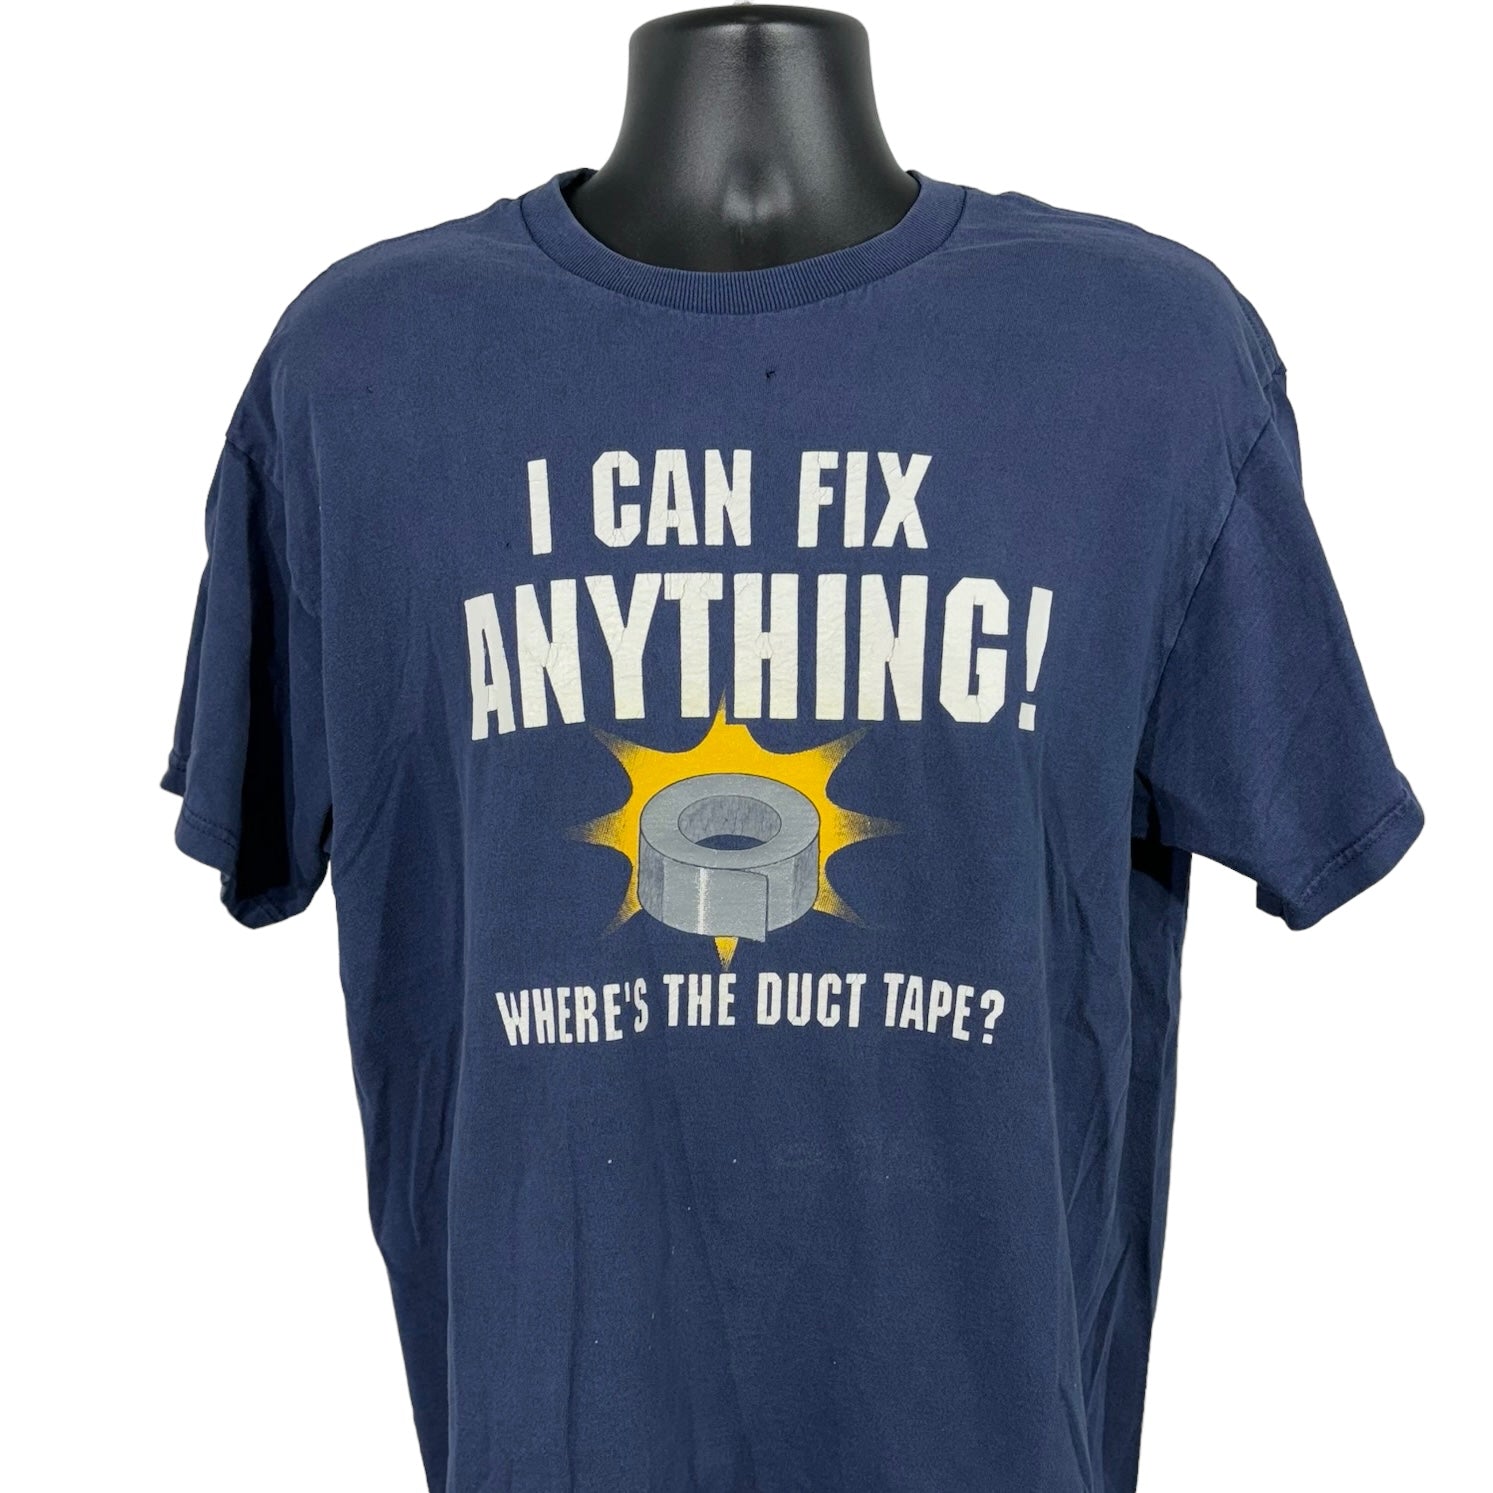 Vintage "I Can Fix Anything" Duct Tape Tee